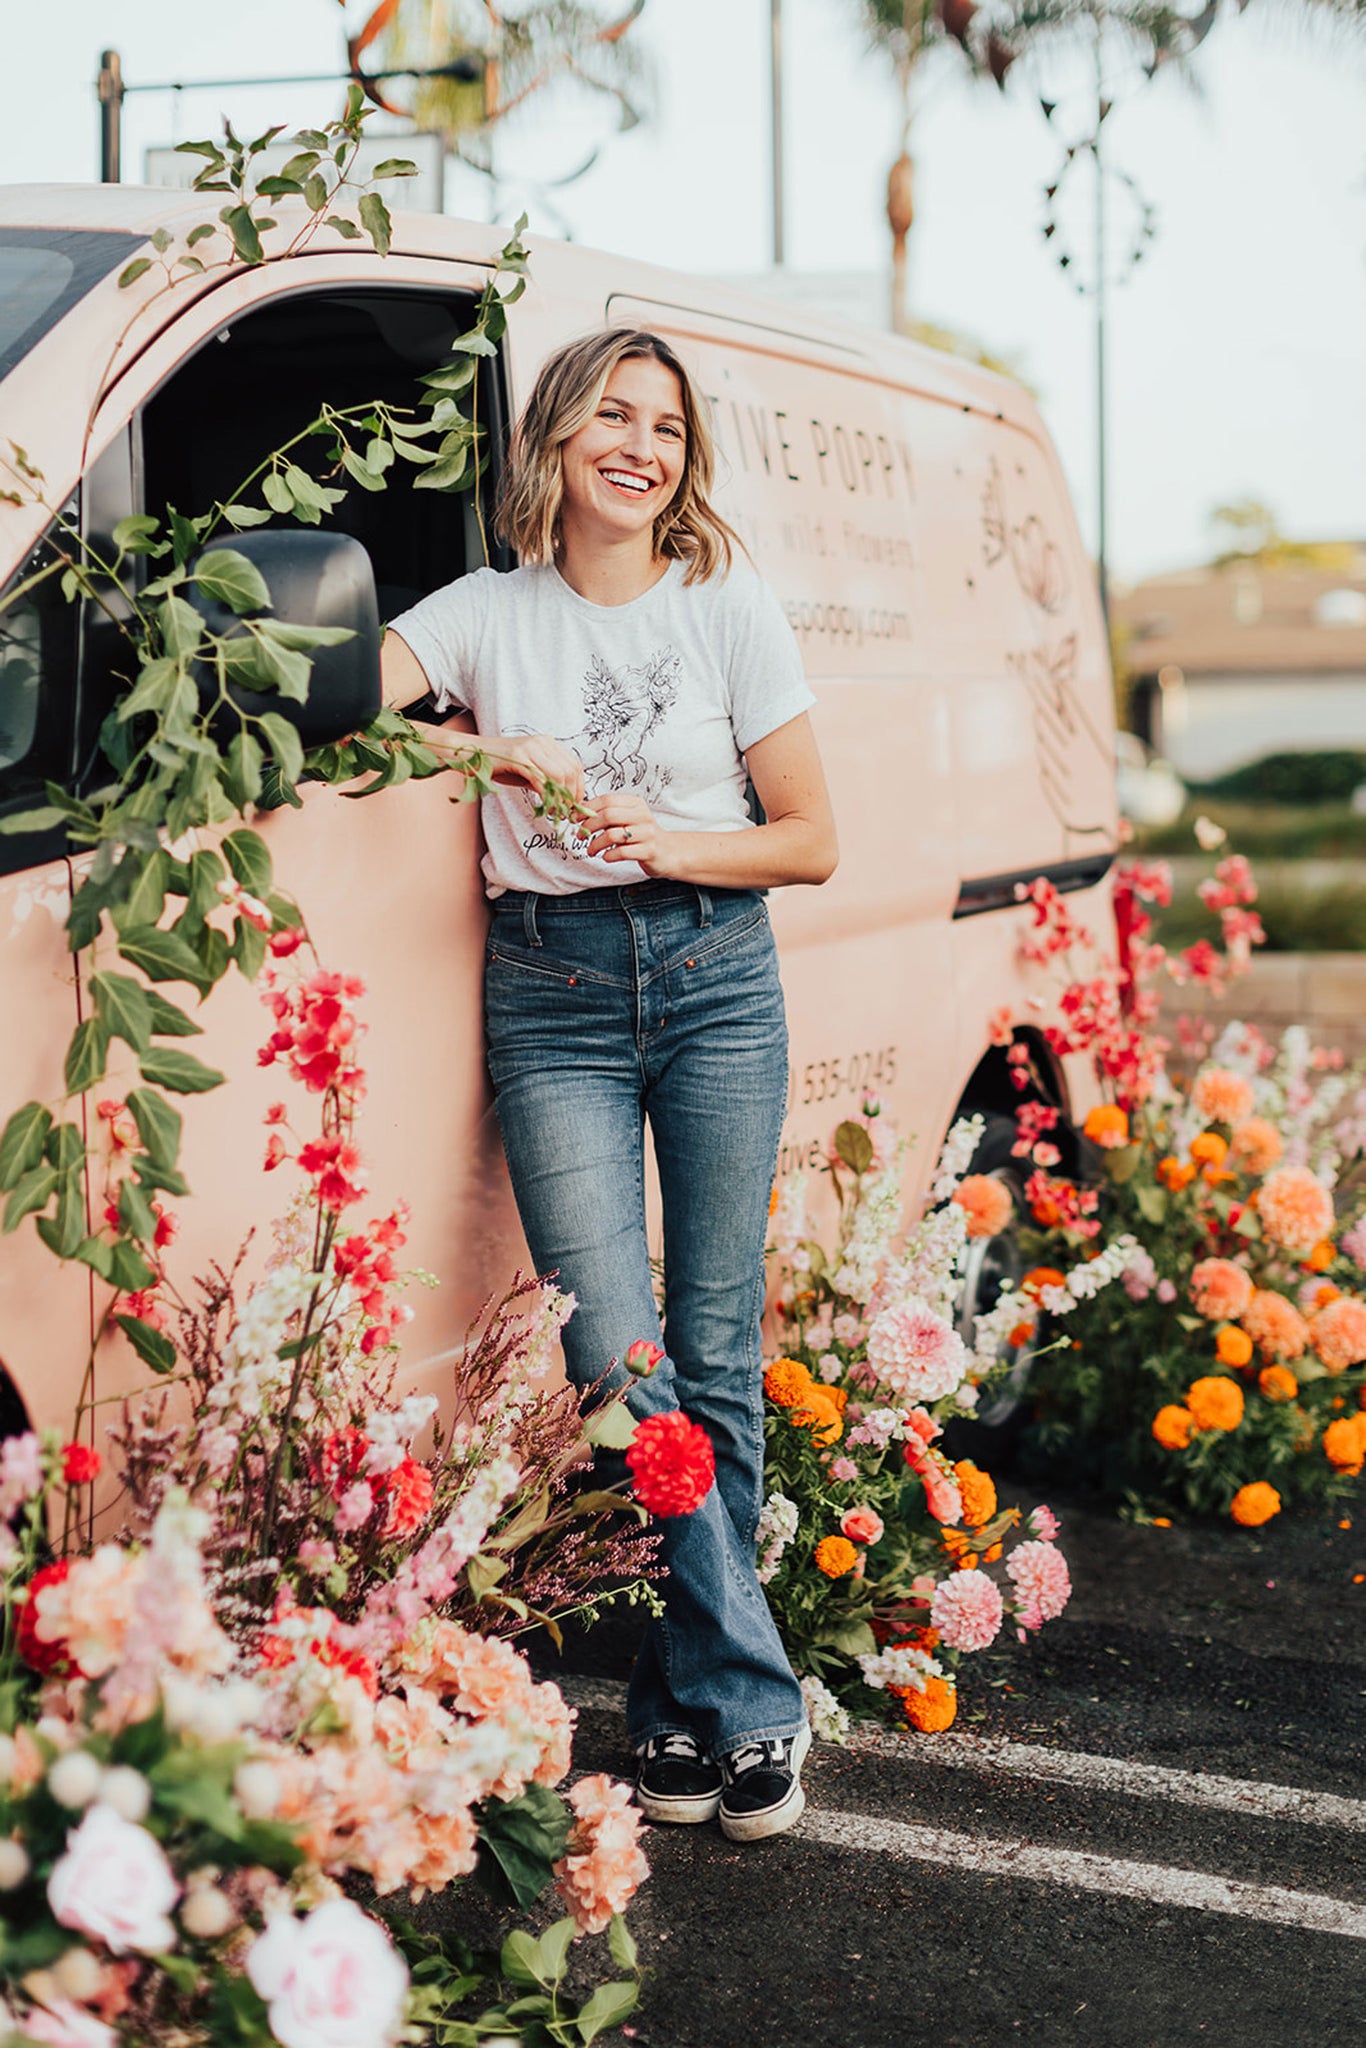 Natalie Gill standing in front of Native Poppy's flower delivery van